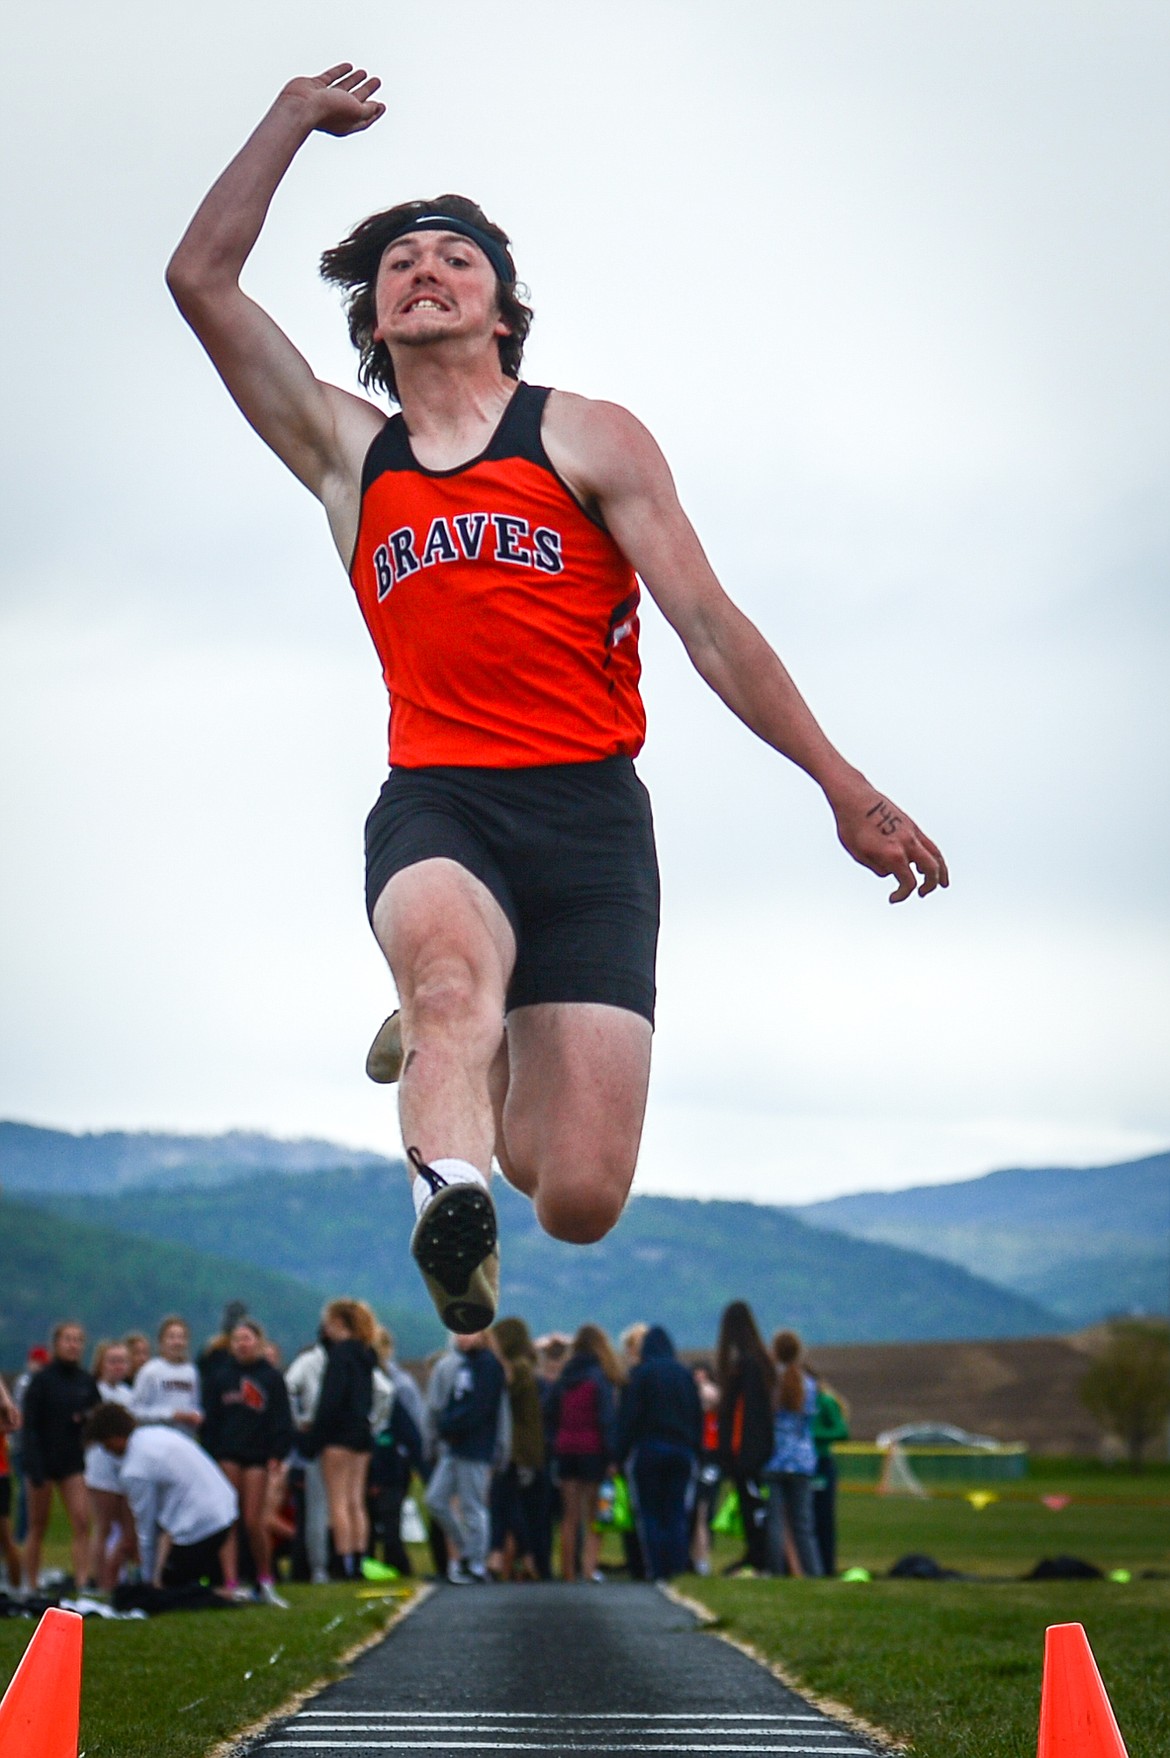 Flathead's Nic Gustafson competes in the long jump during a crosstown meet against Glacier at Glacier High School on Friday. (Casey Kreider/Daily Inter Lake)